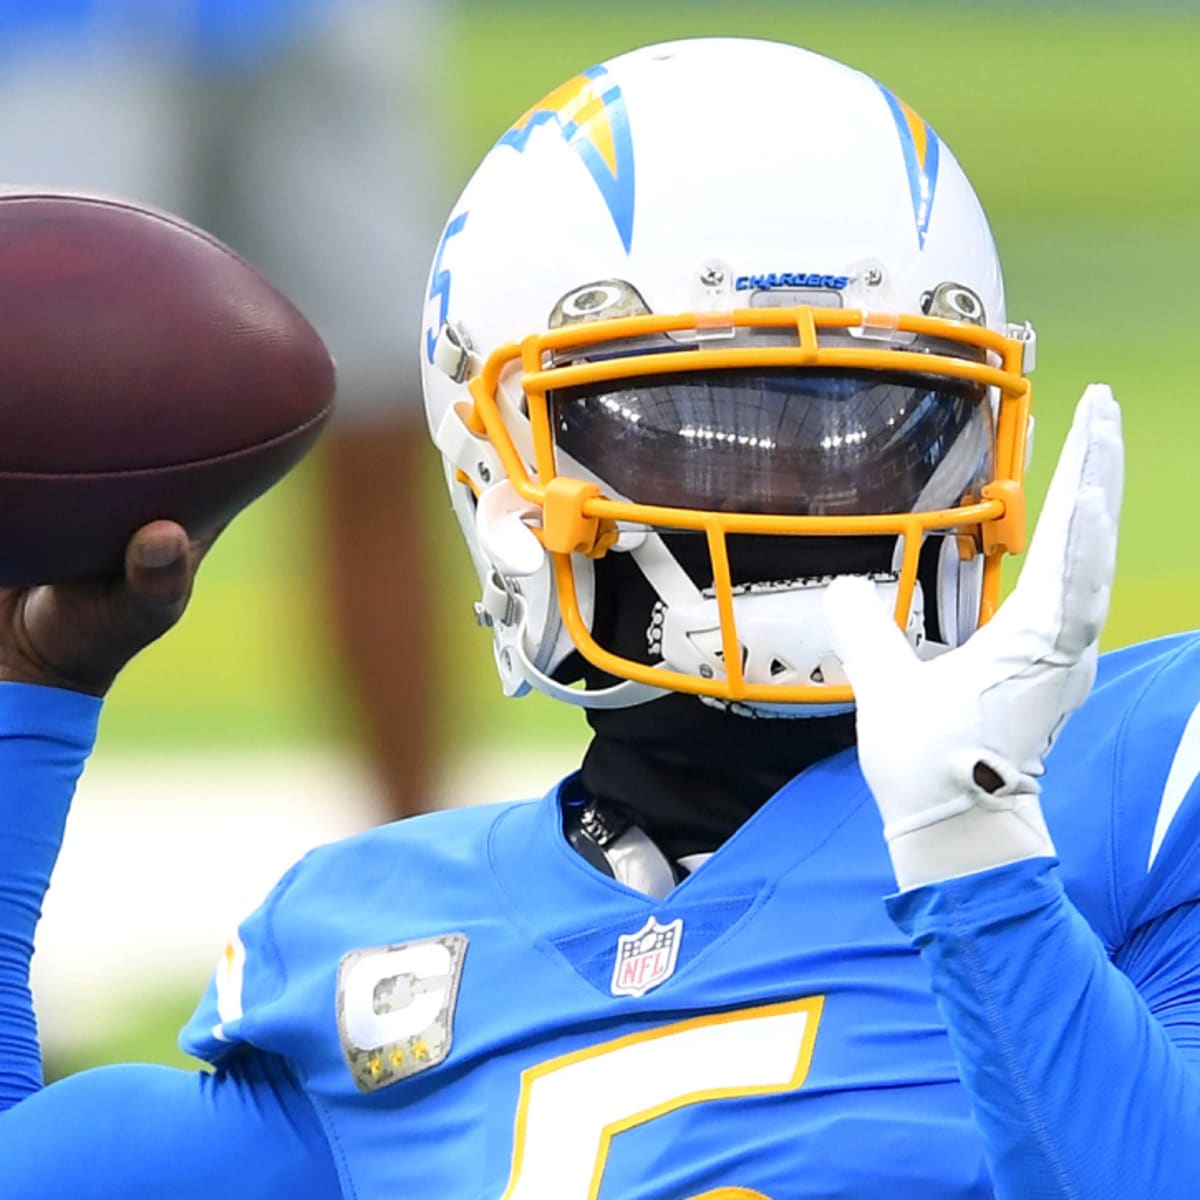 Los Angeles Chargers quarterback Tyrod Taylor passes against the